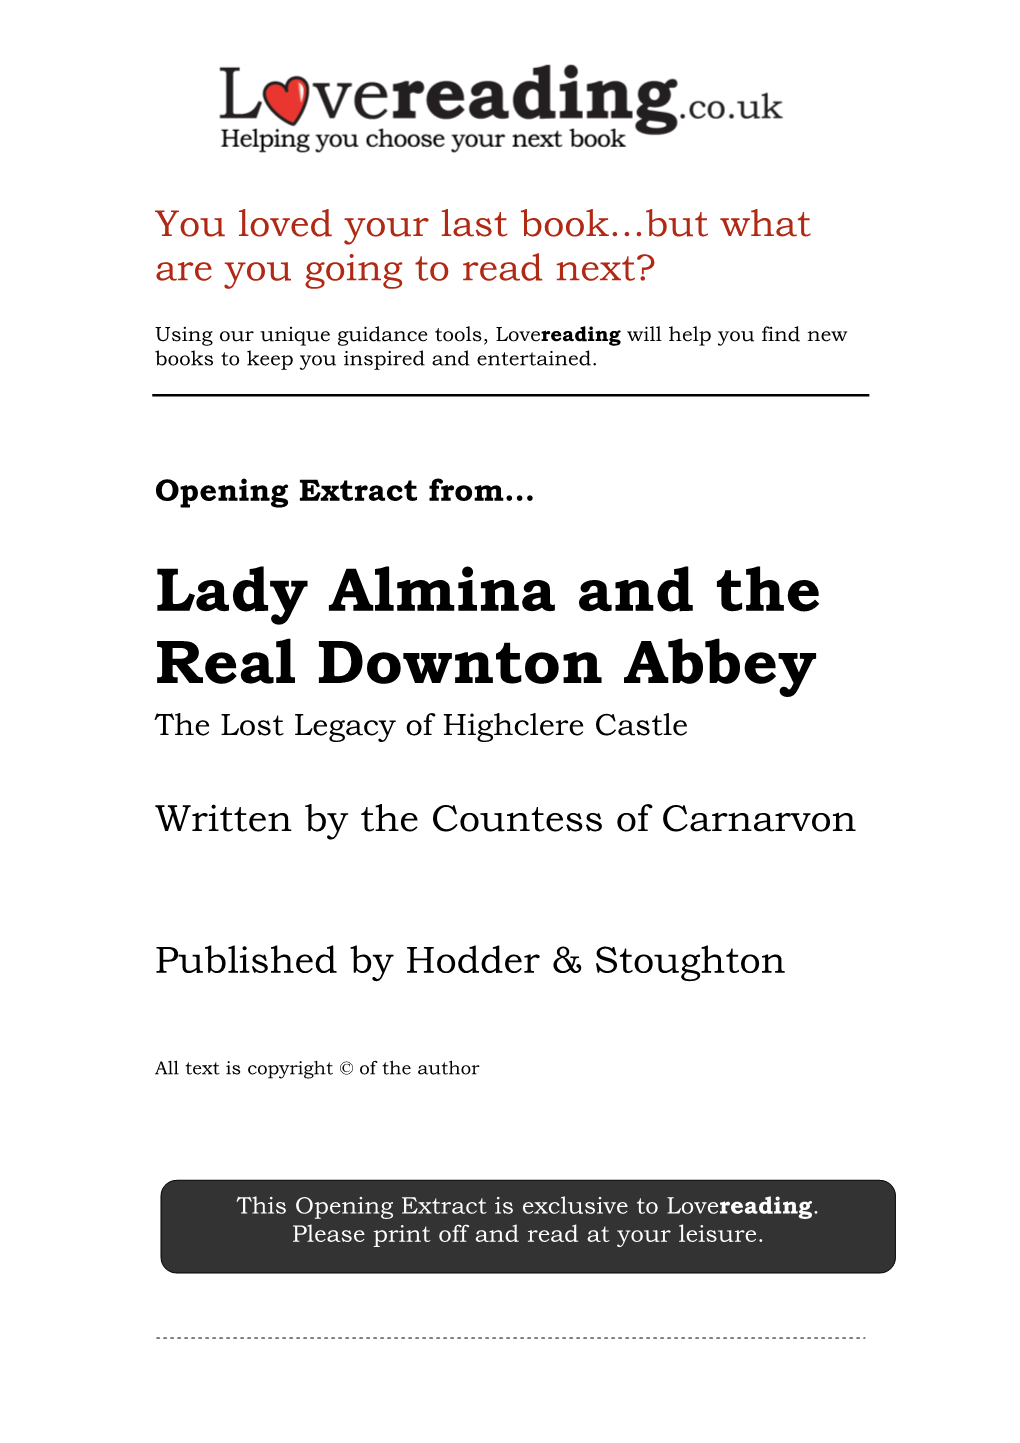 Lady Almina and the Real Downton Abbey the Lost Legacy of Highclere Castle